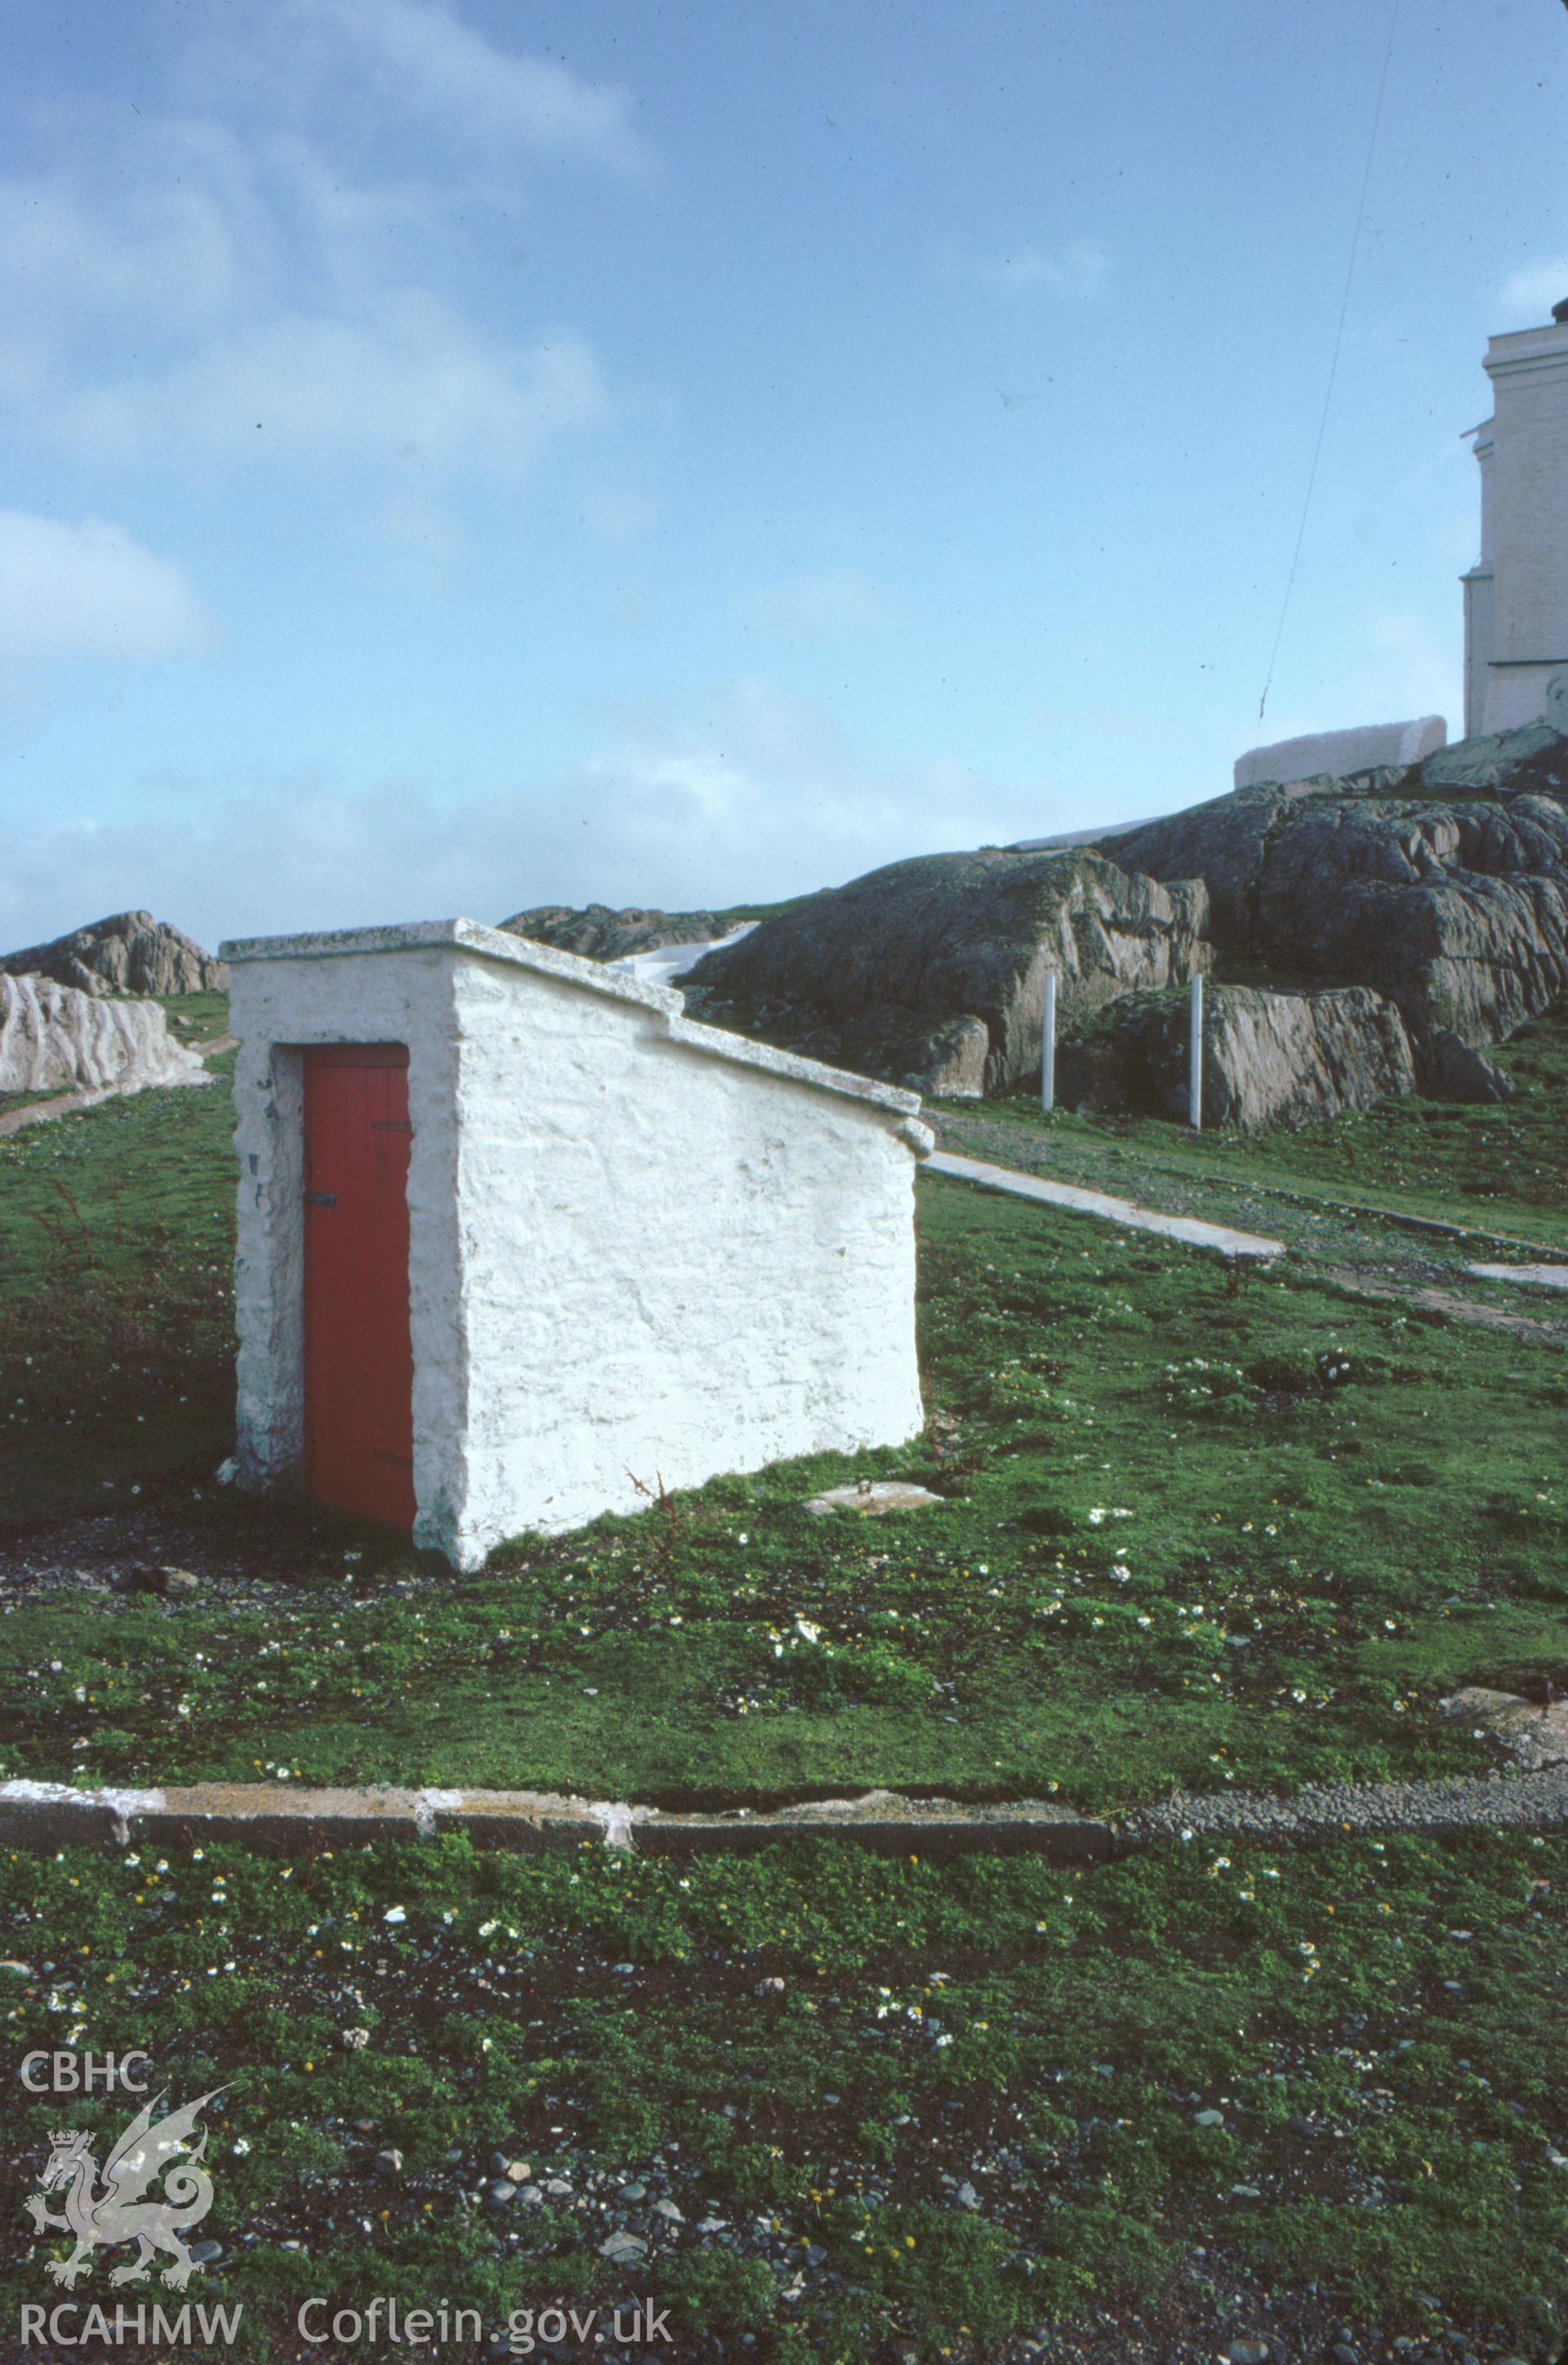 Colour slide showing the well house.